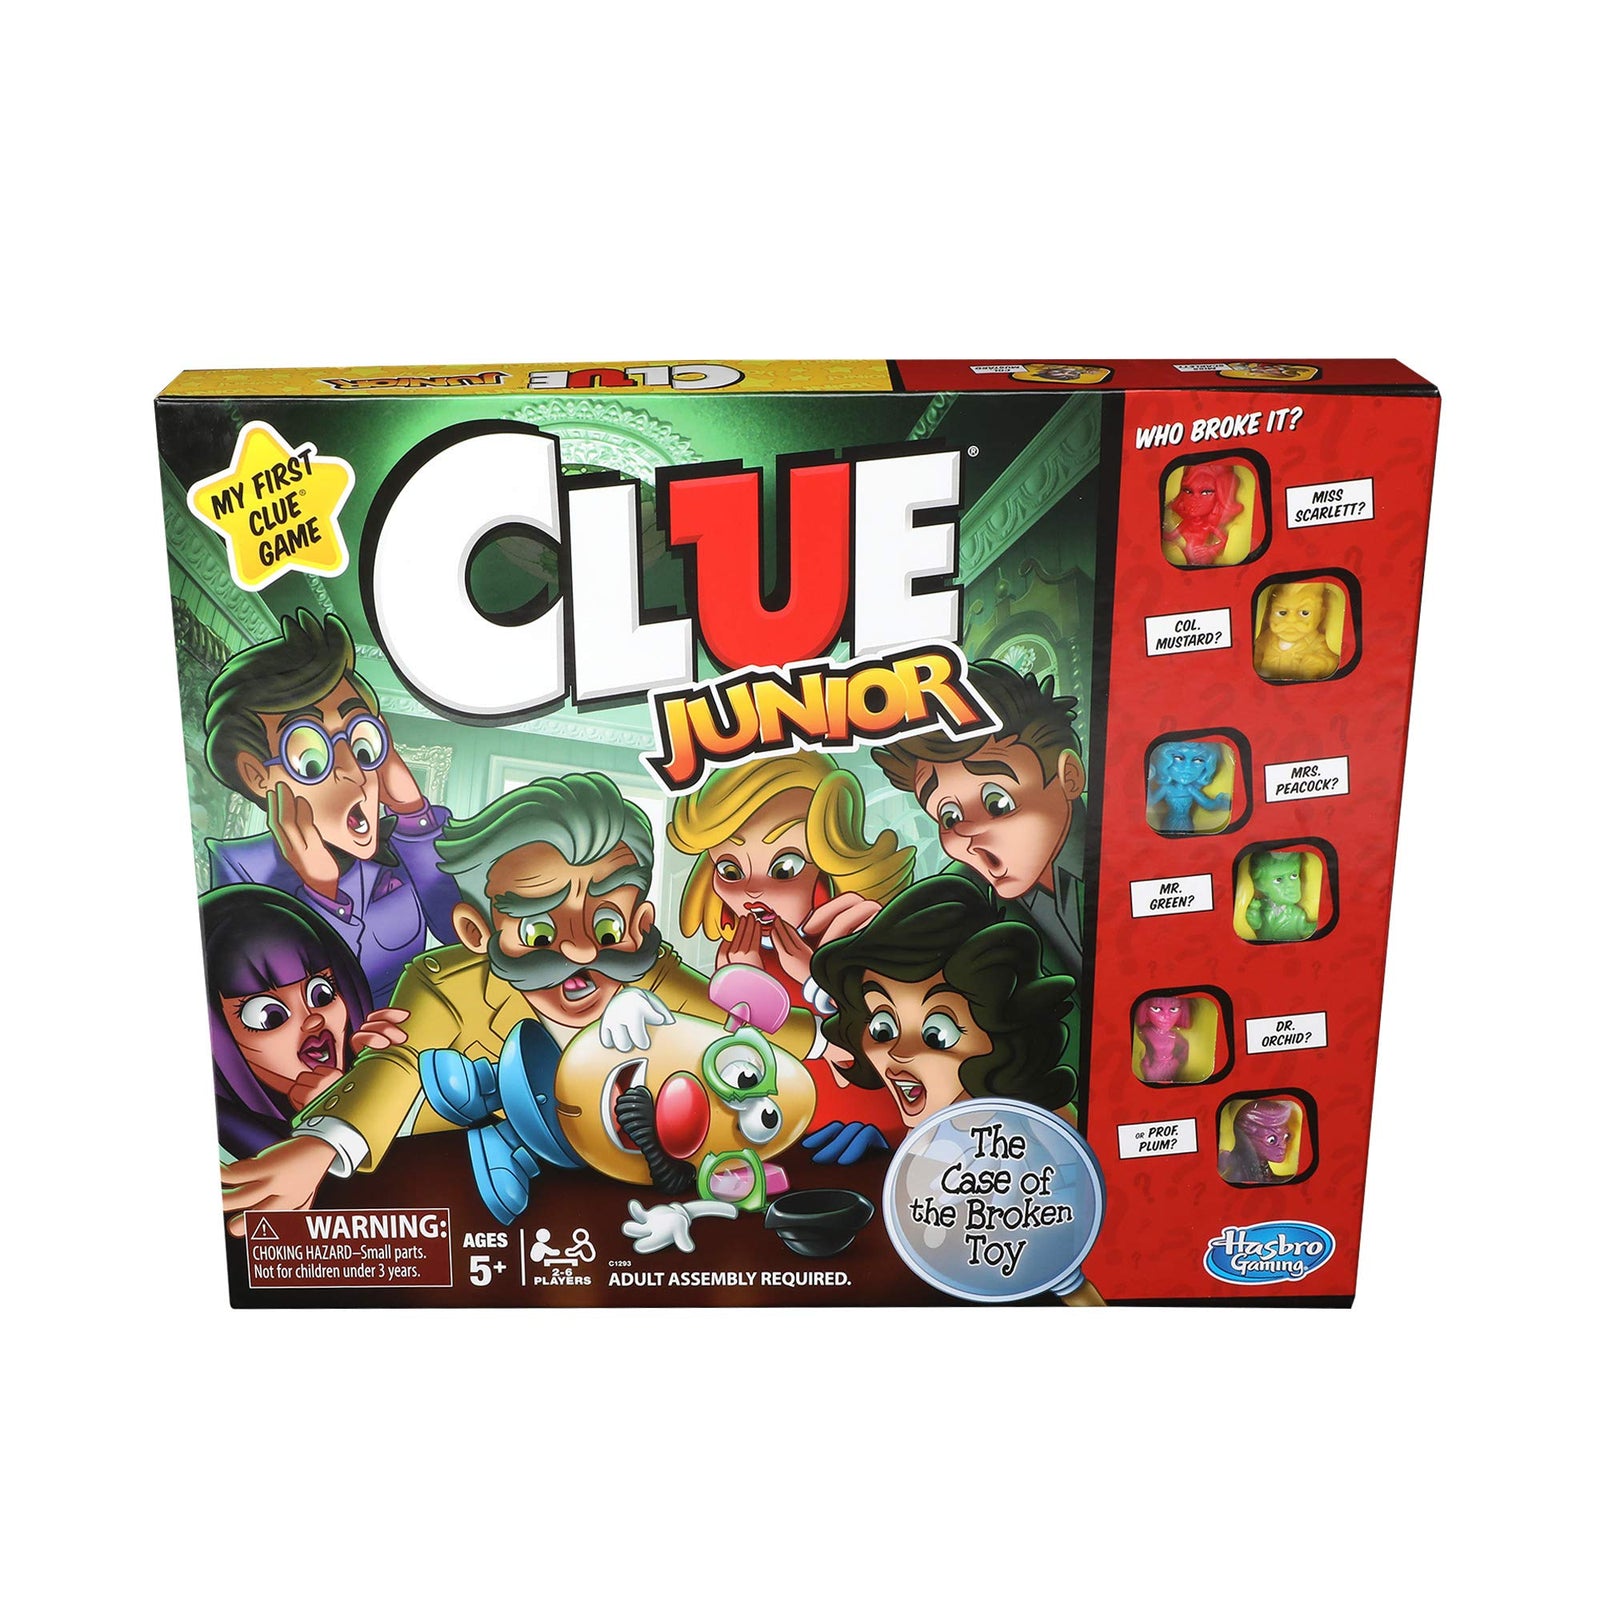 Clue Junior Board Game for Kids Ages 5 and Up, Case of The Broken Toy, Classic Mystery Game for 2-6 Players